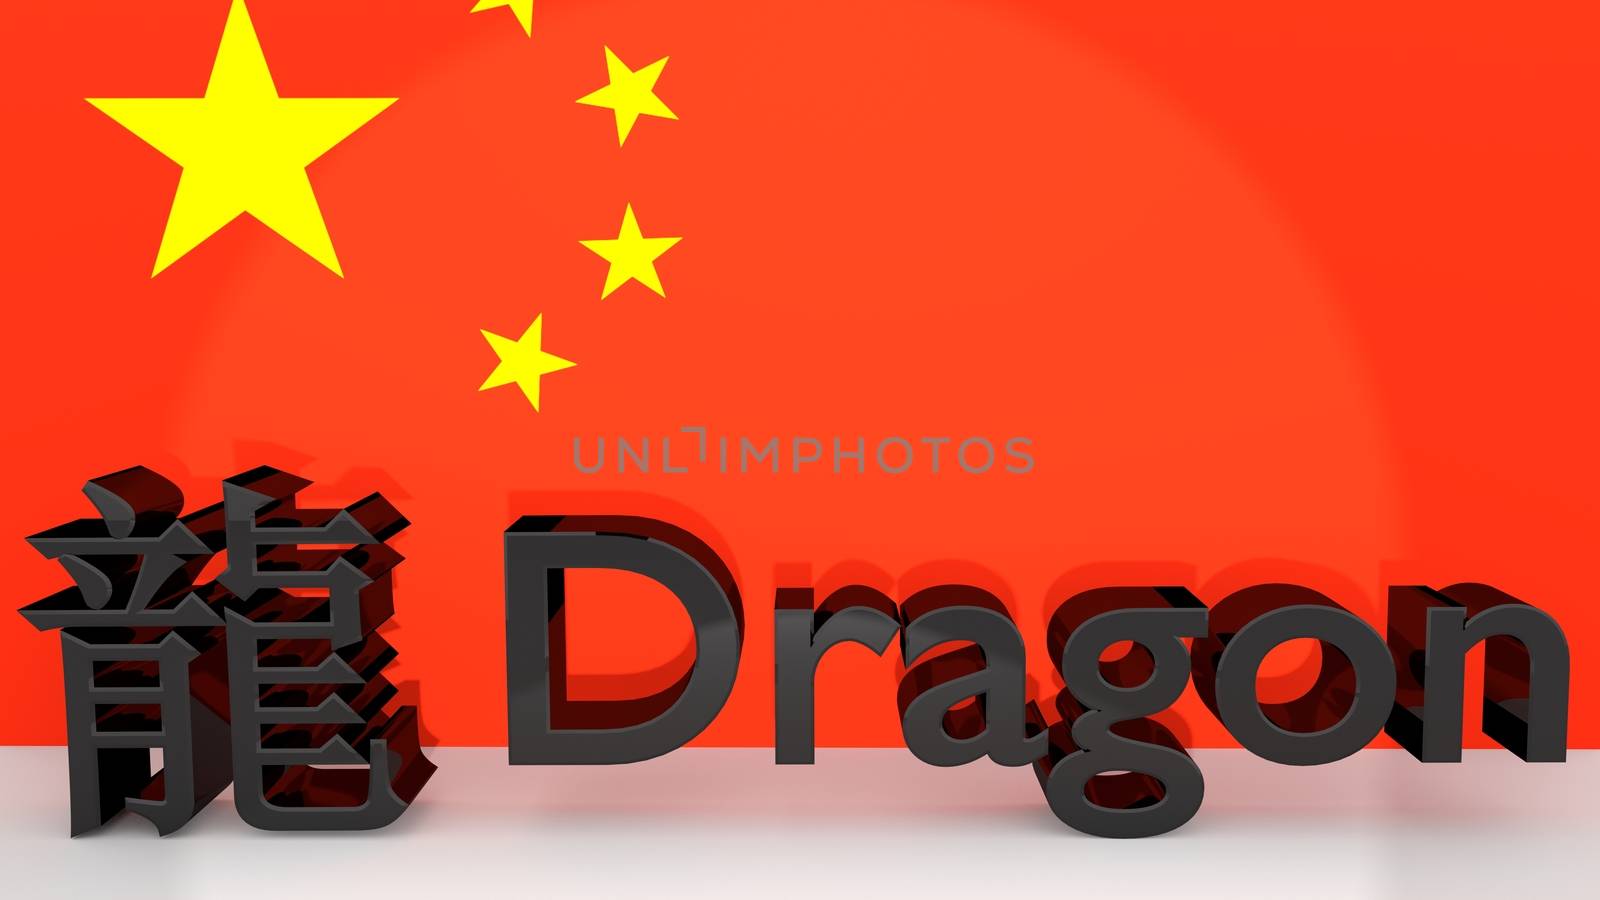 Chinese characters for the zodiac sign Dragon with english translation made of dark metal in front on a chinese flag.